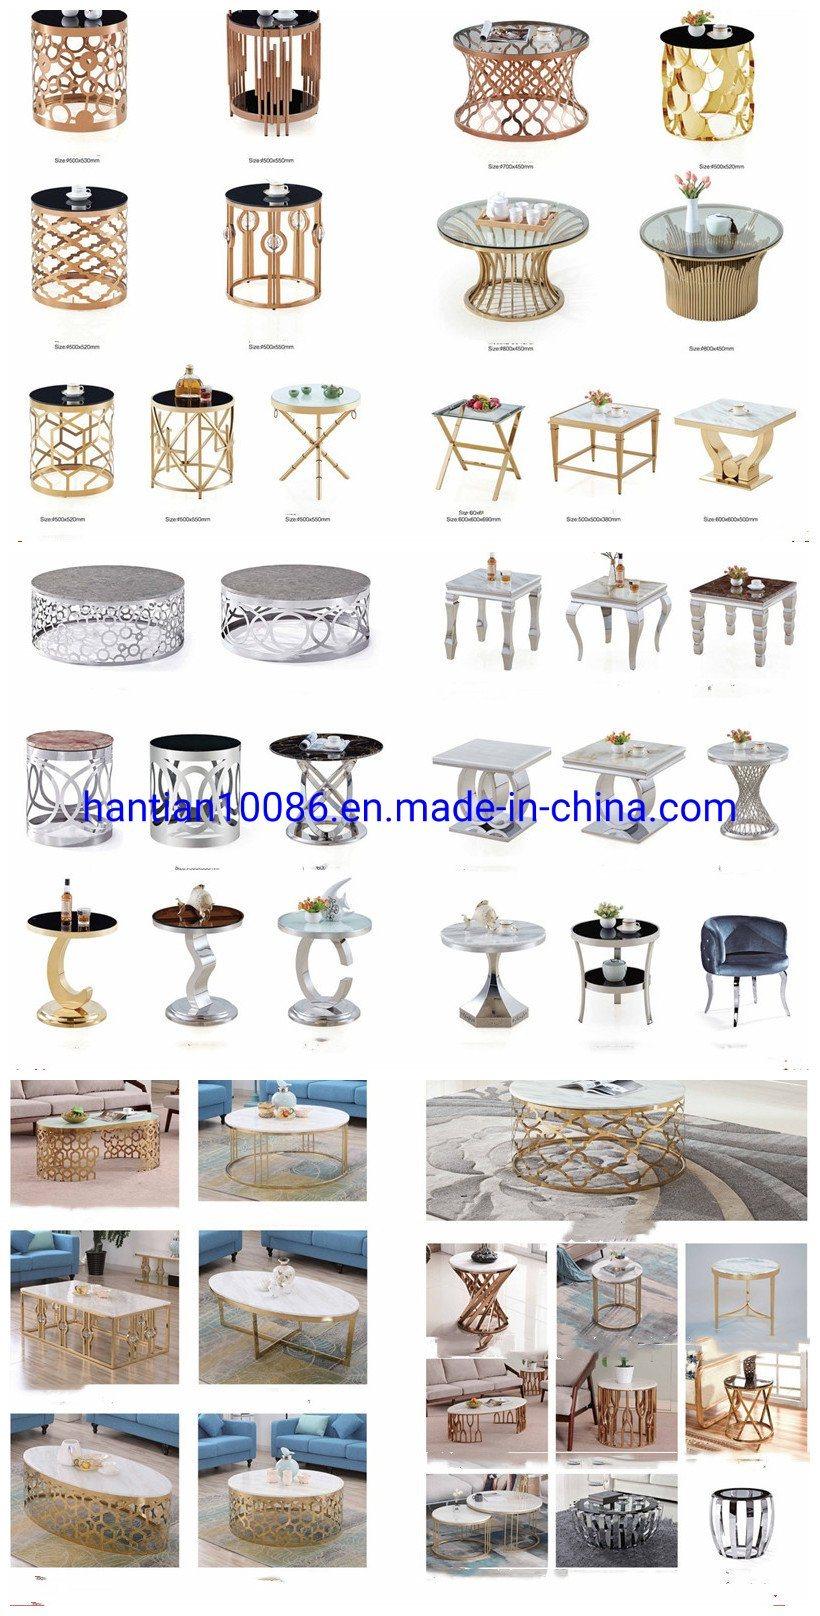 White Round Table Antique Furniture Round Marble Side Table with Golden Metal Base